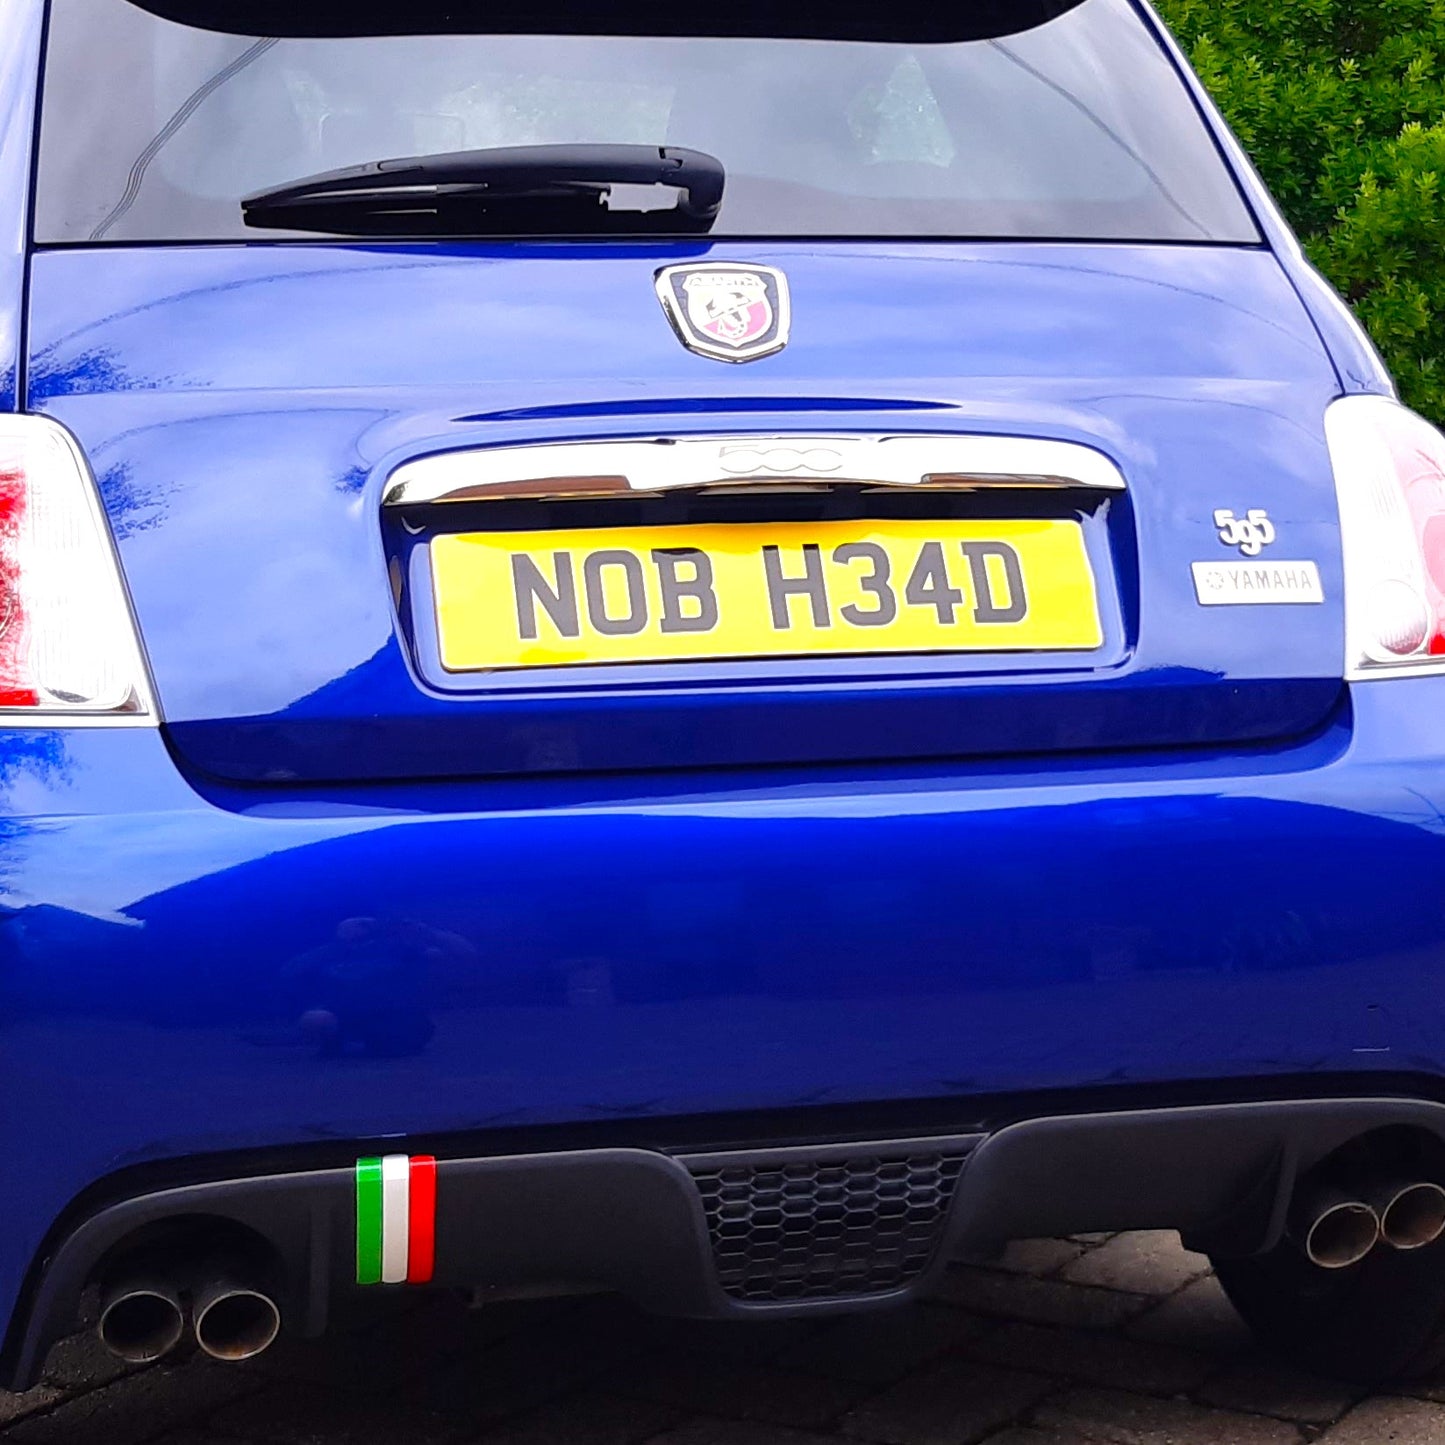 2 Joke Number Plate Stickers With"NOB H34D"